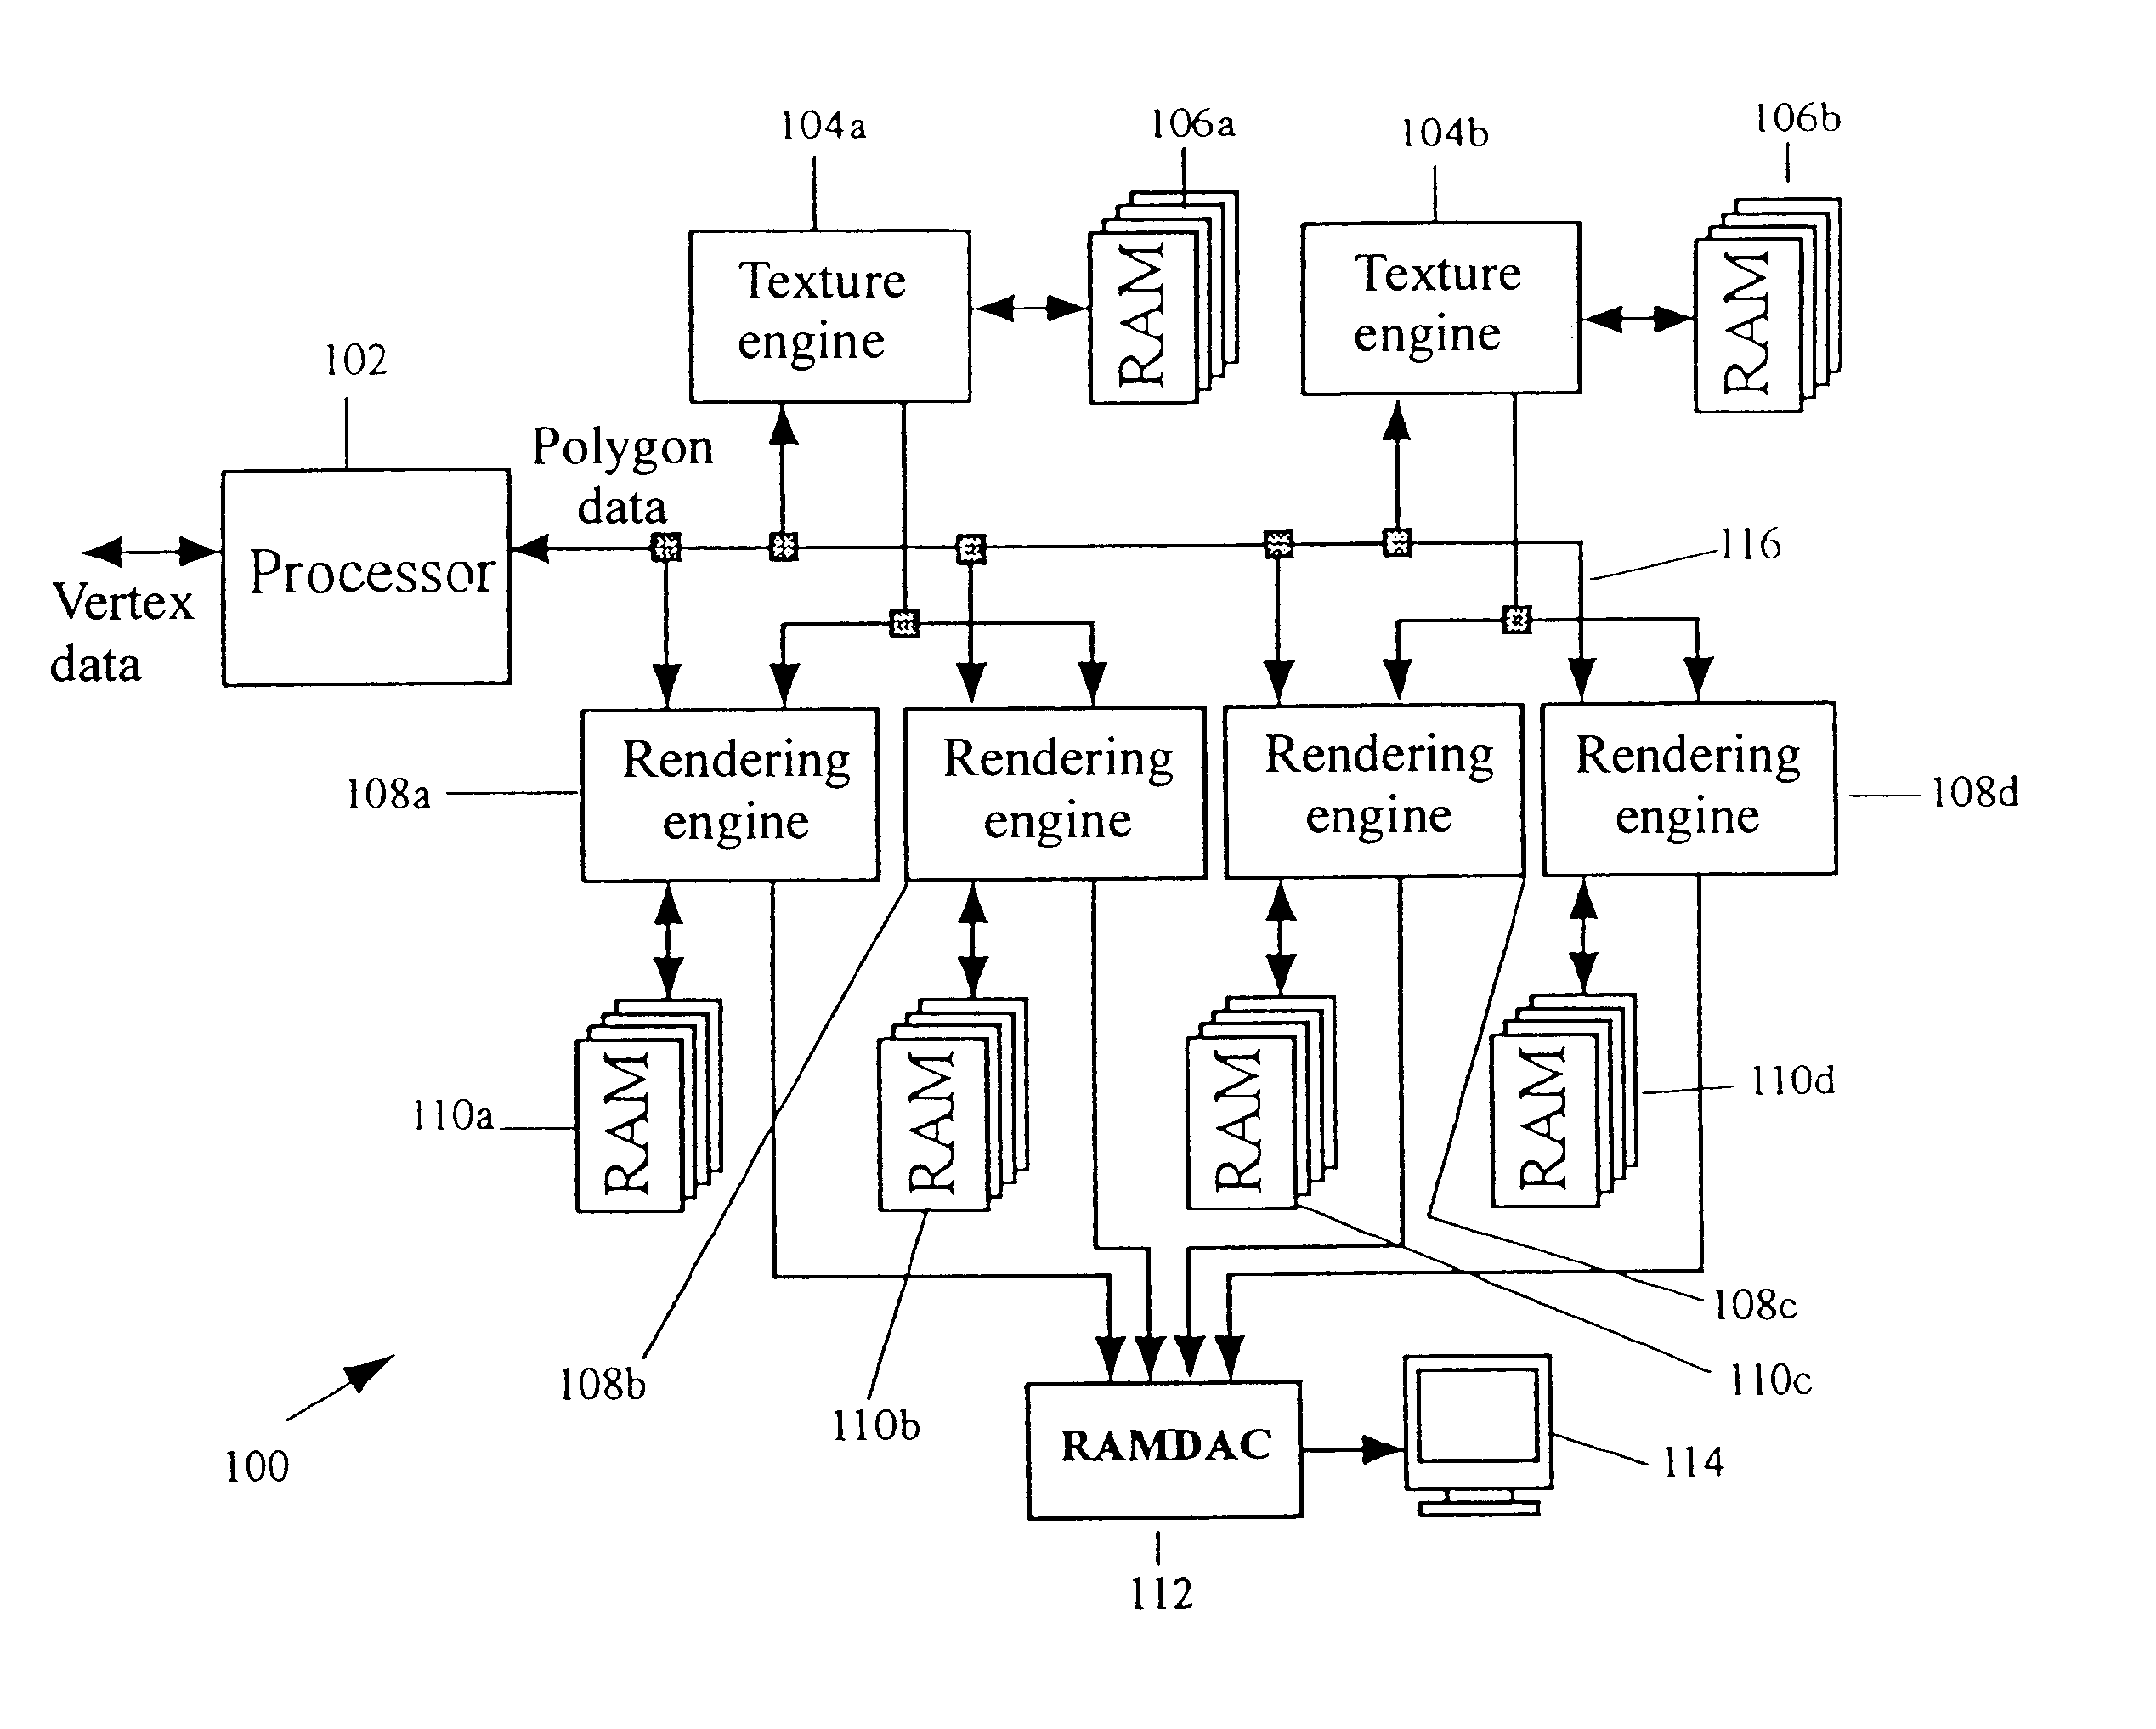 Method for rasterizing a graphics basic component